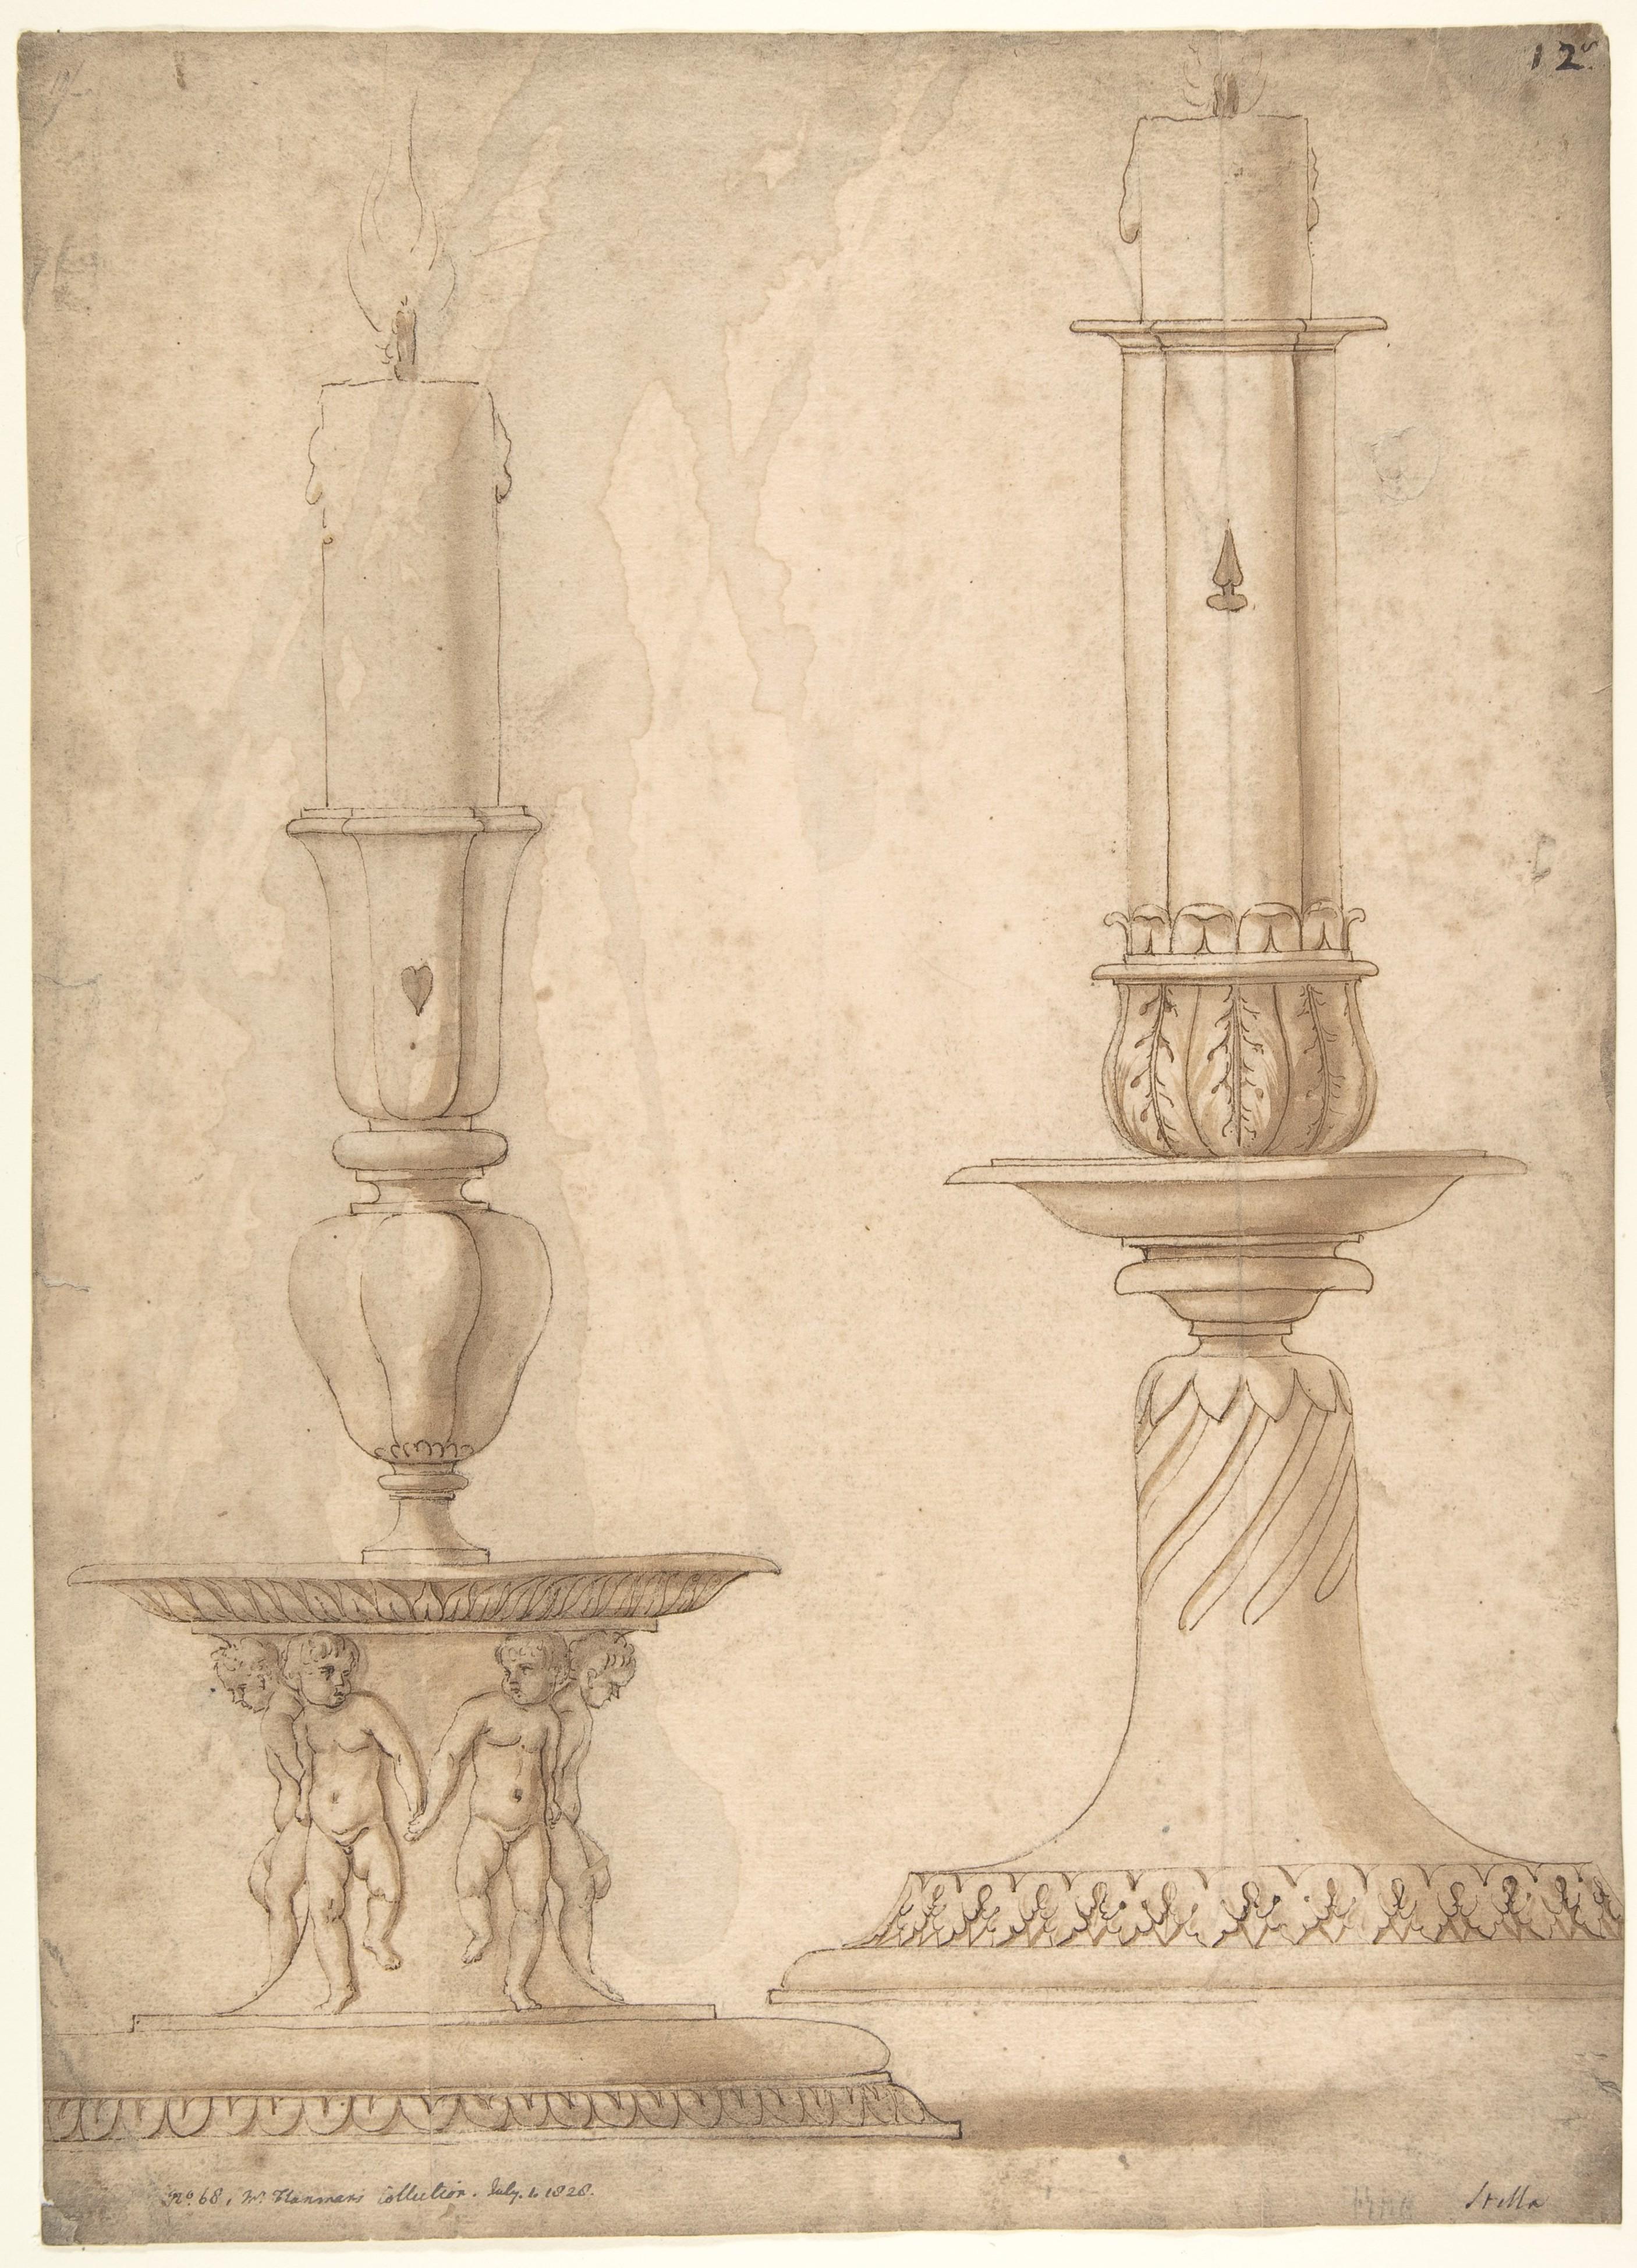 This drawing is very close to the other silverware designs created by Giulio Romano for the Gonzaga court in Mantua, where he settled from 1524 onwards. An exhibition organized a year ago at the Palazzo del Té in Mantua, La Forza delle Cose (The